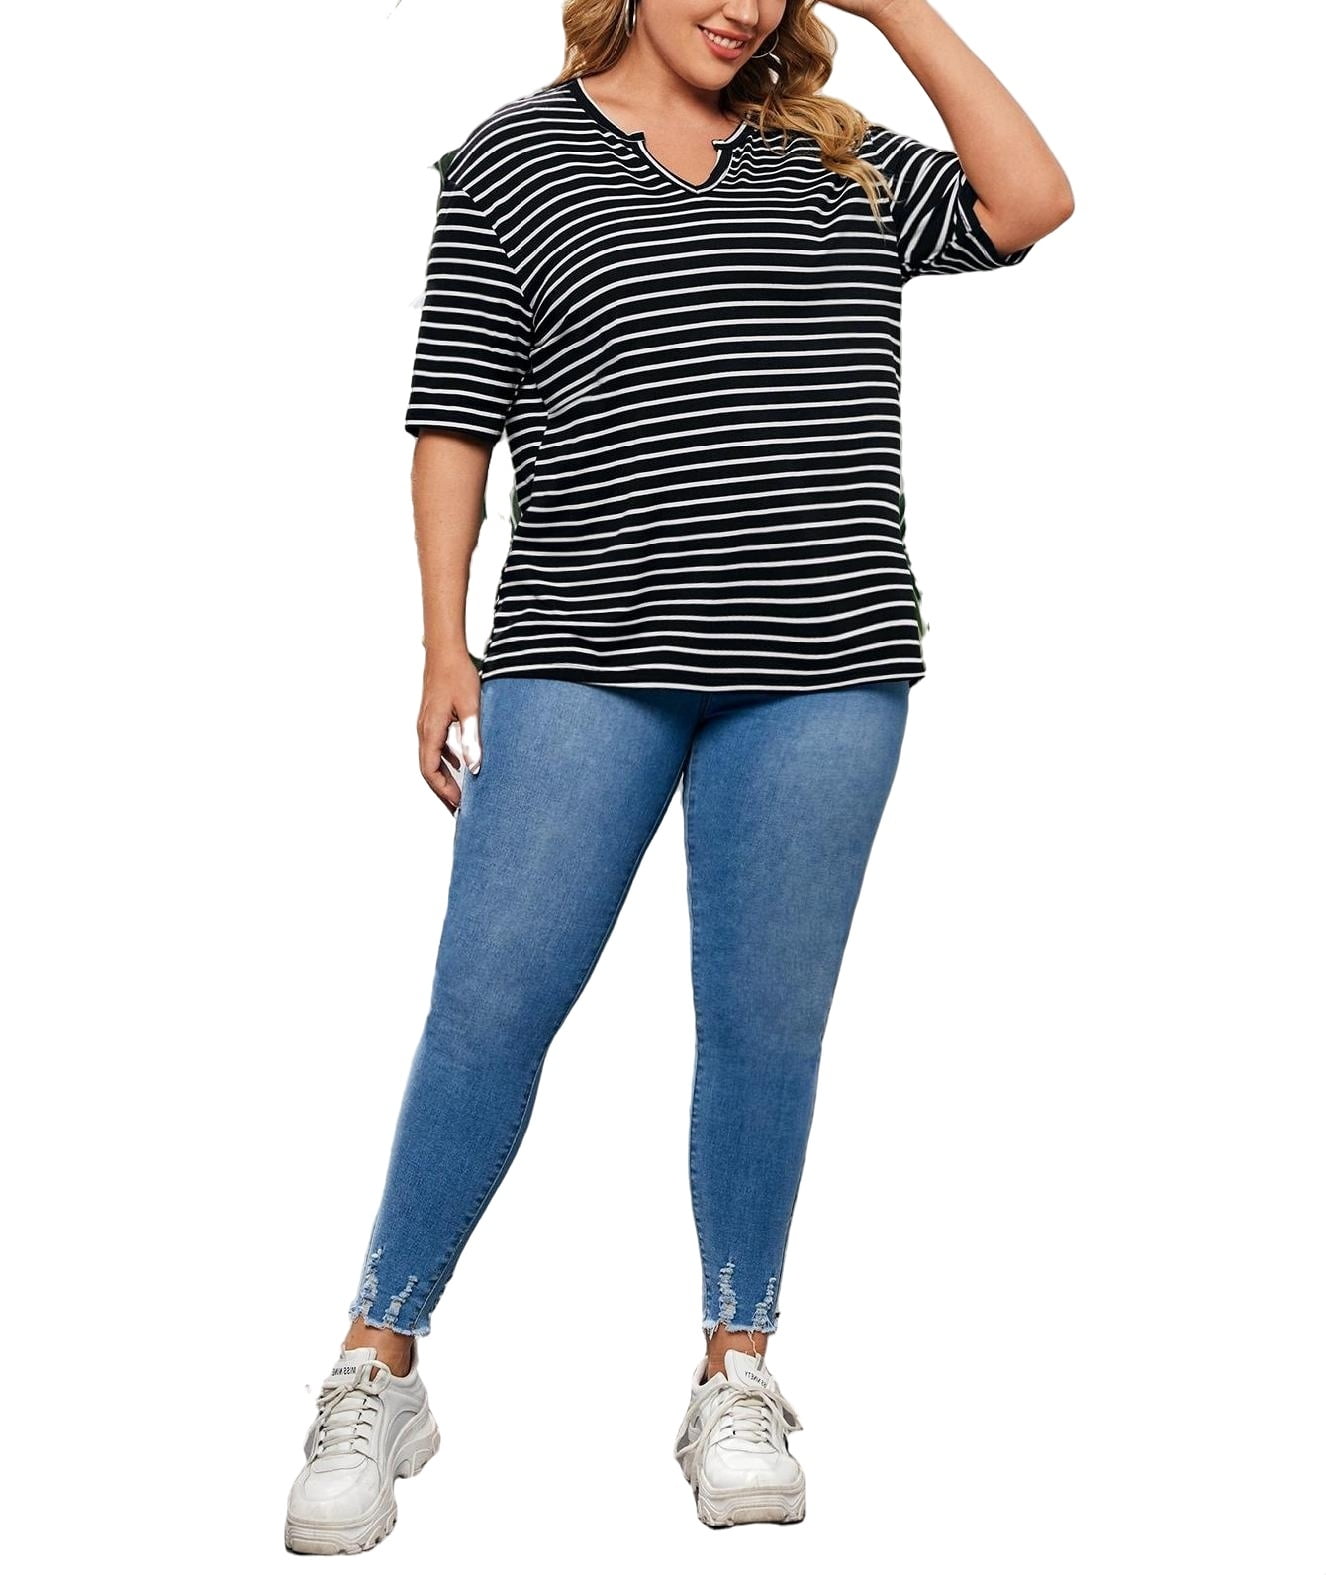 Women's Black and White Striped Notched Casual Elbow-Length Plus Size T ...